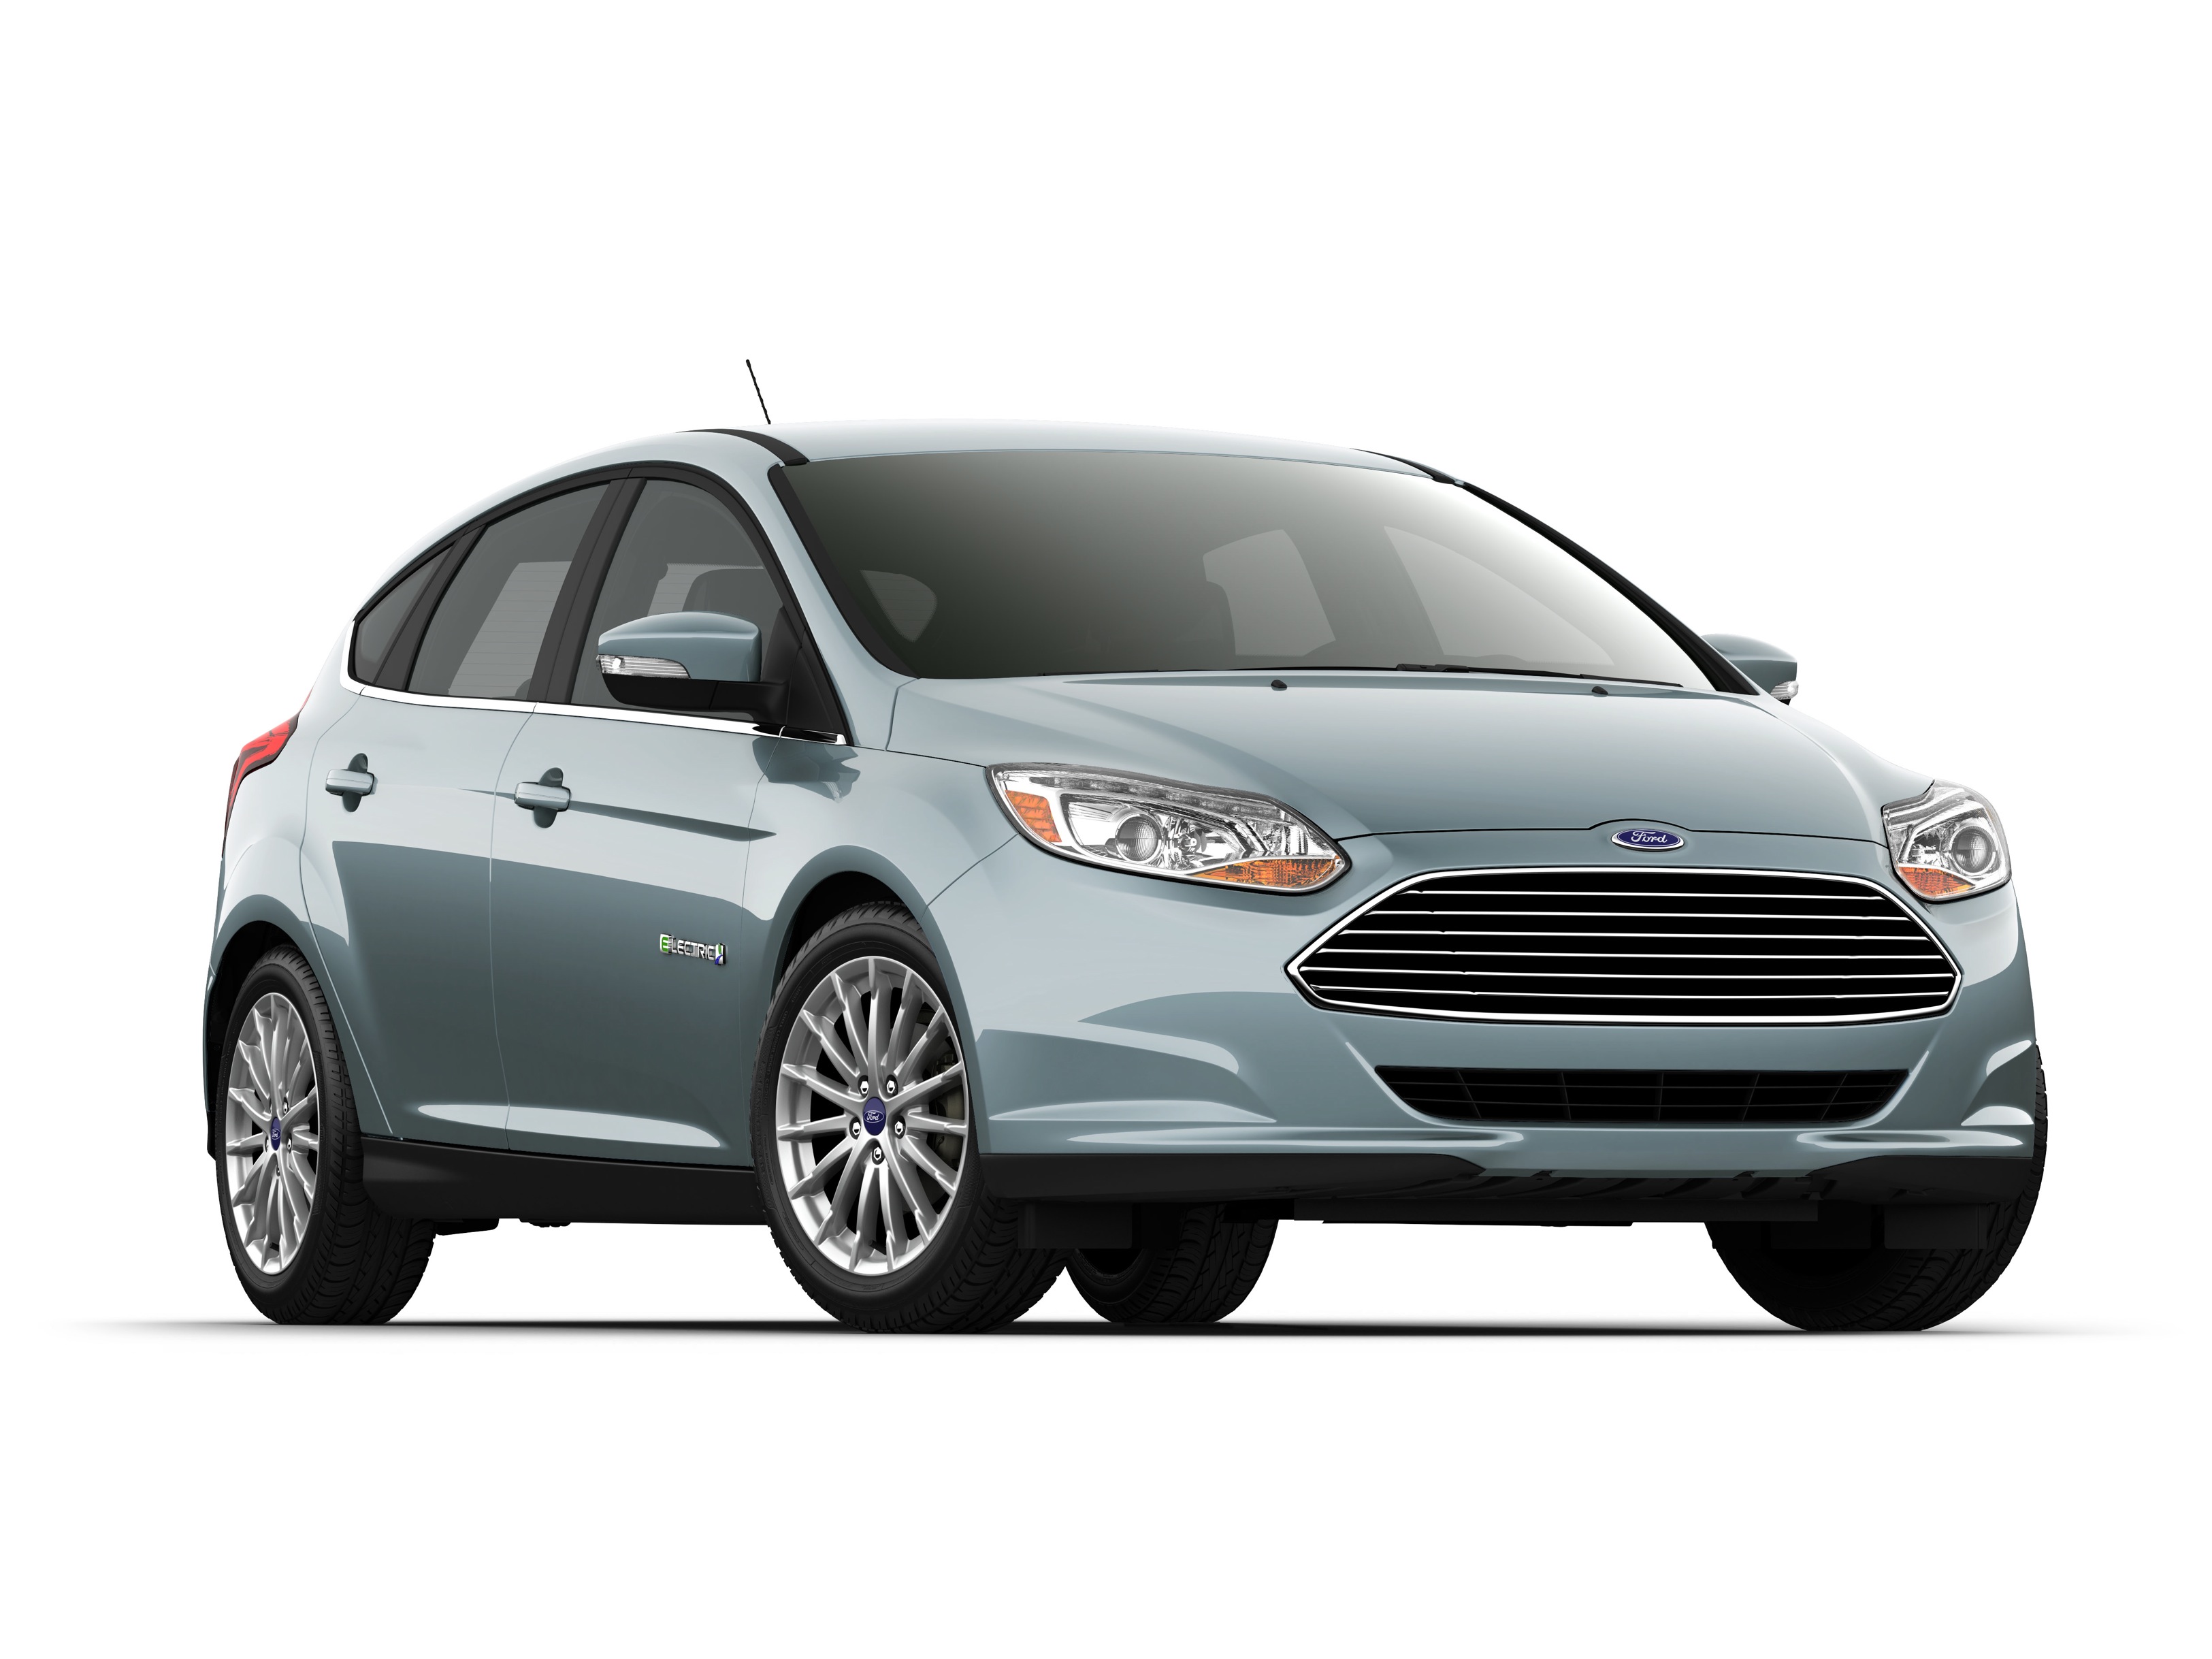 2012 ford focus electric full production details unveiled at ces